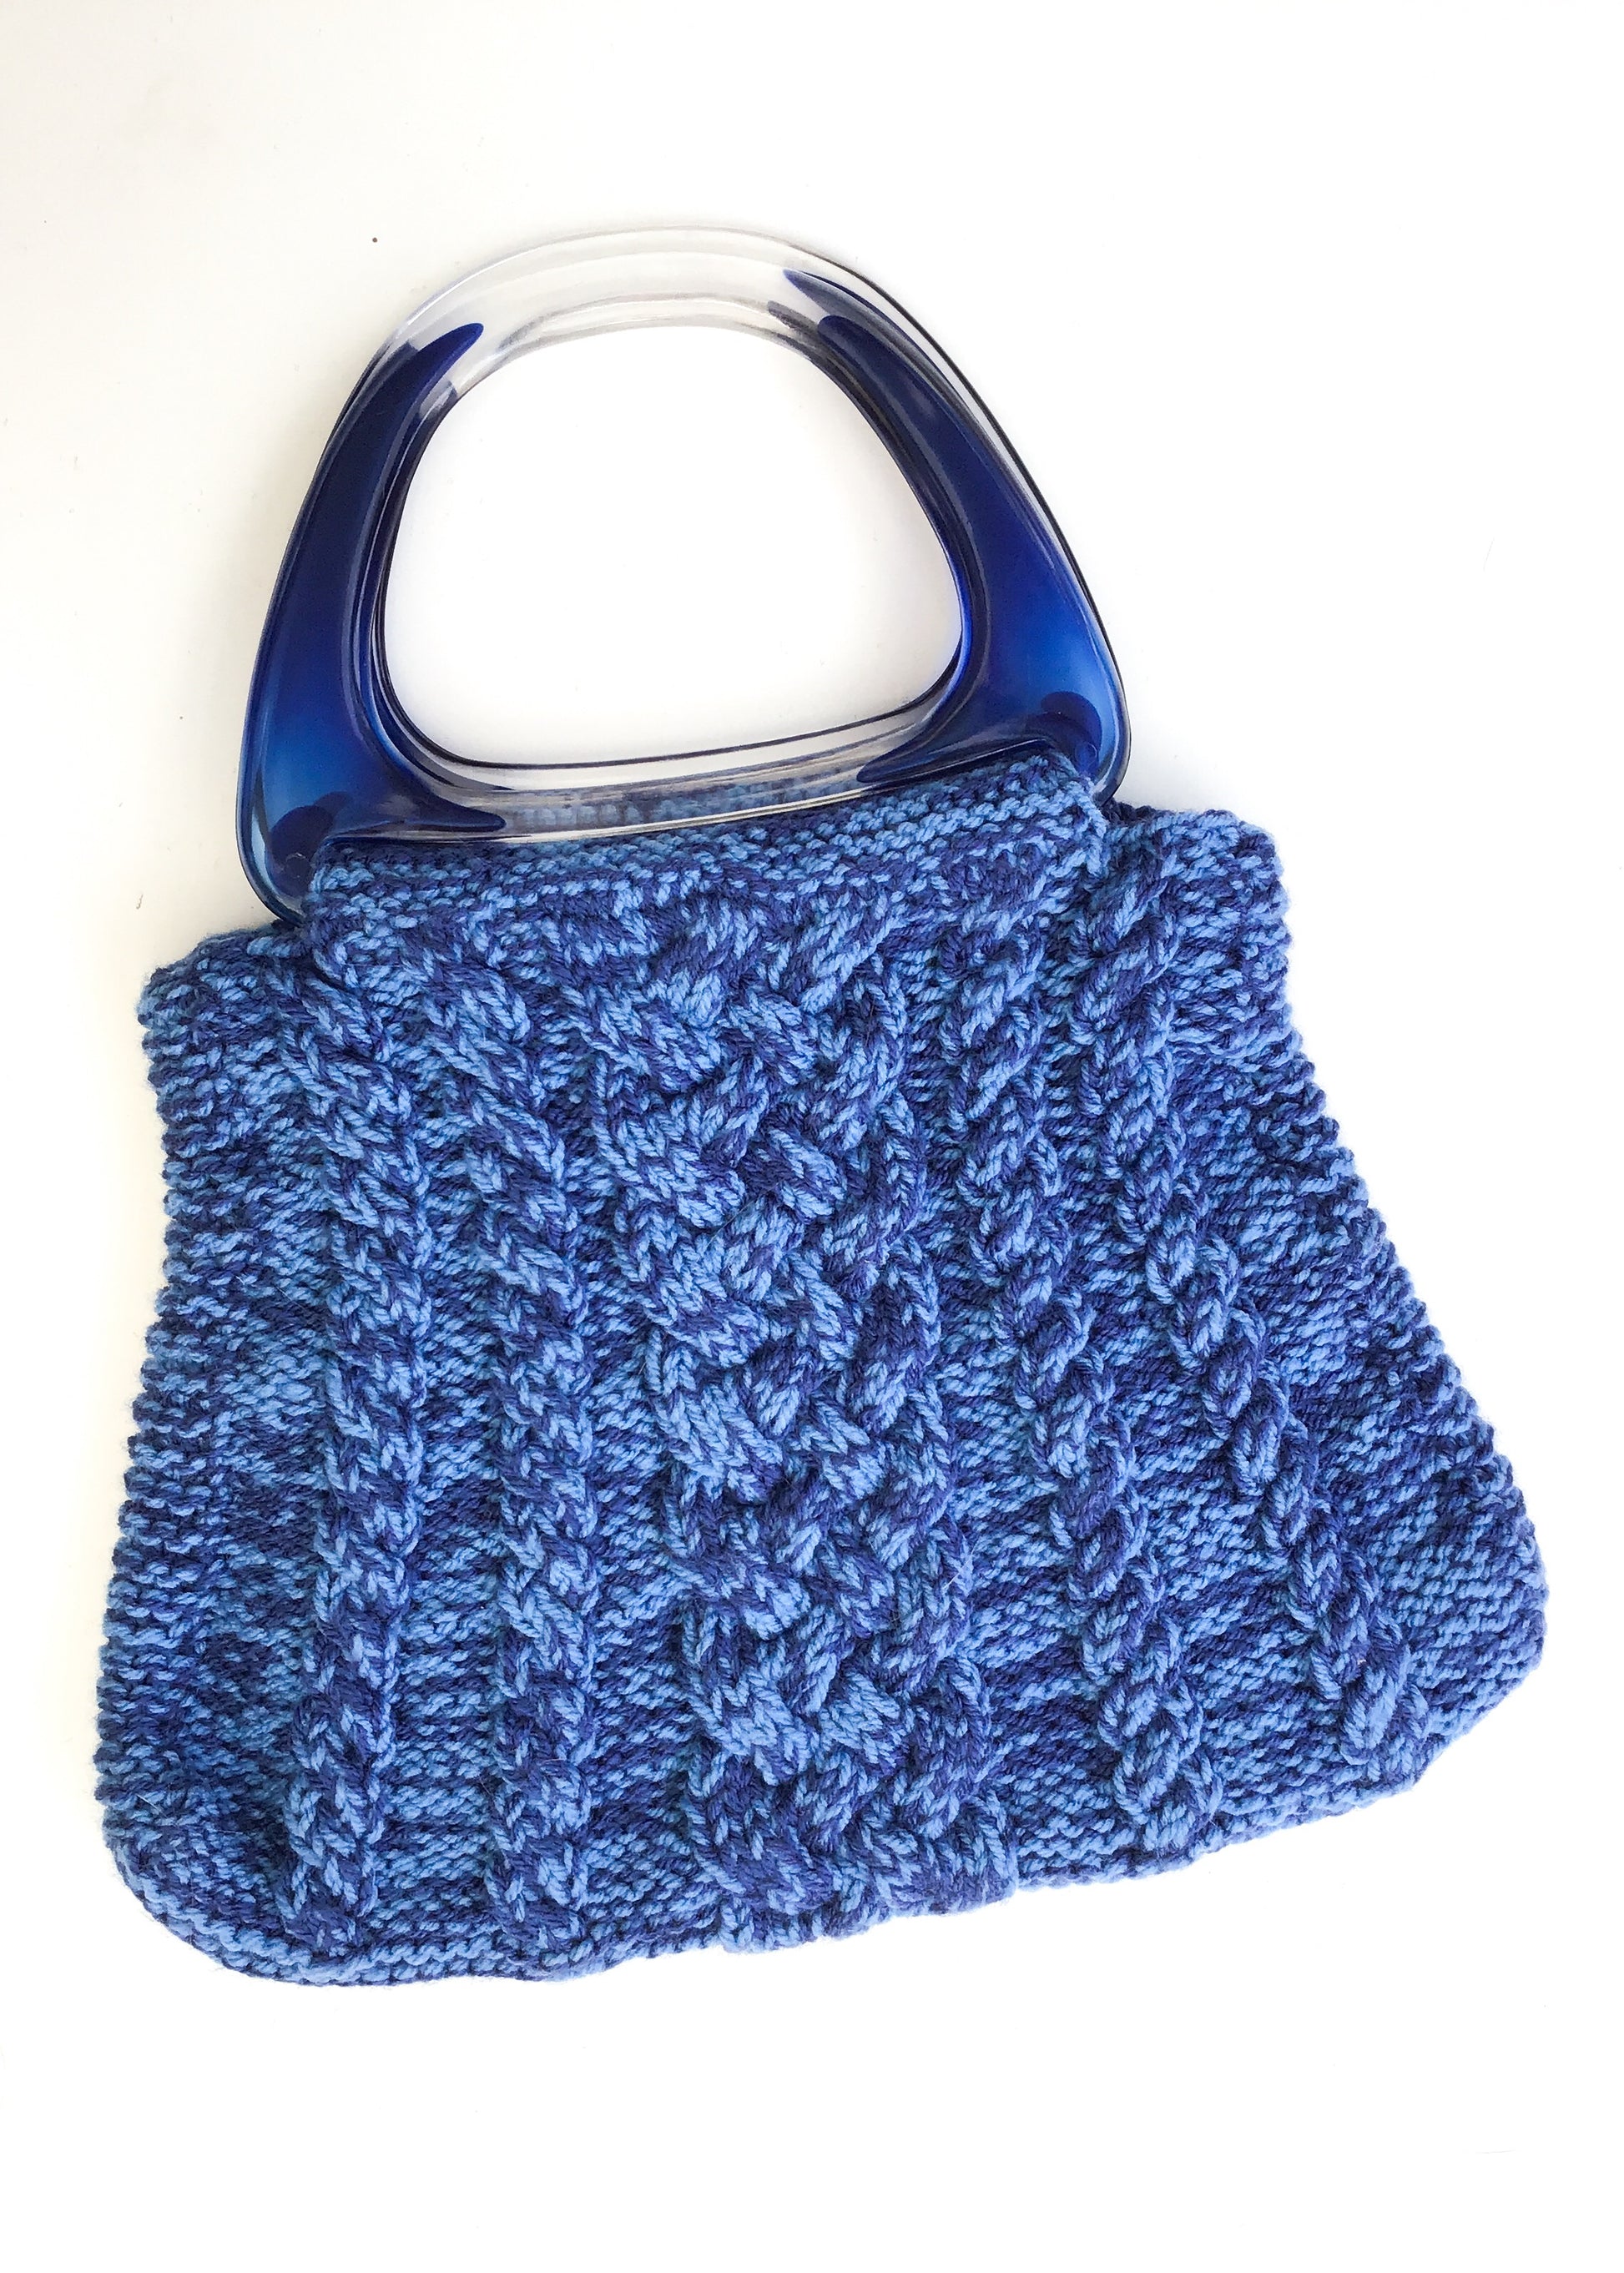 Buy Hand knitted knitting vintage work bag with blue lucite handles